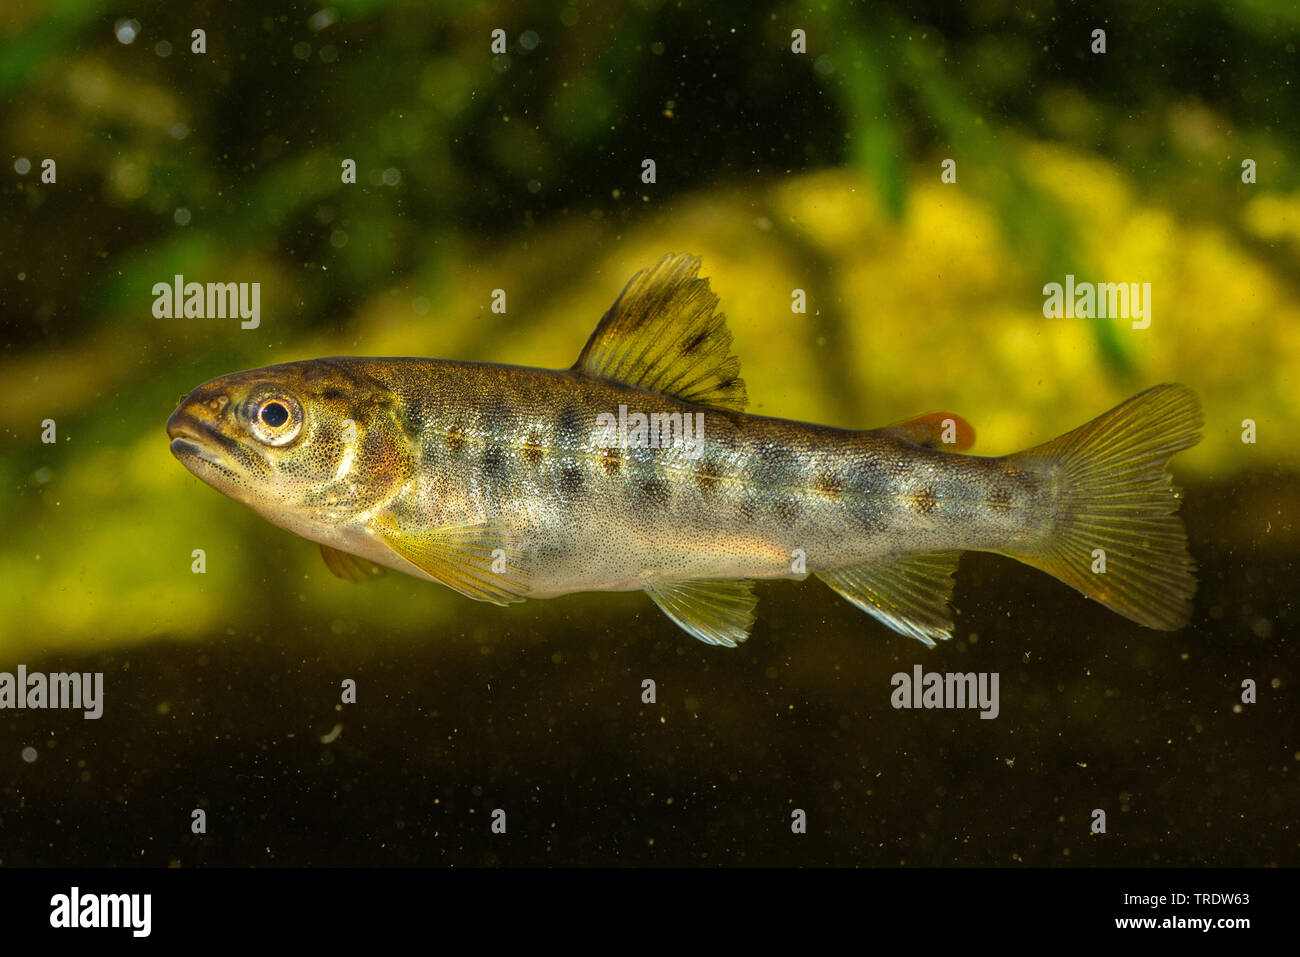 brown trout, river trout, brook trout (Salmo trutta fario), young animal, side view, Germany, Bavaria Stock Photo